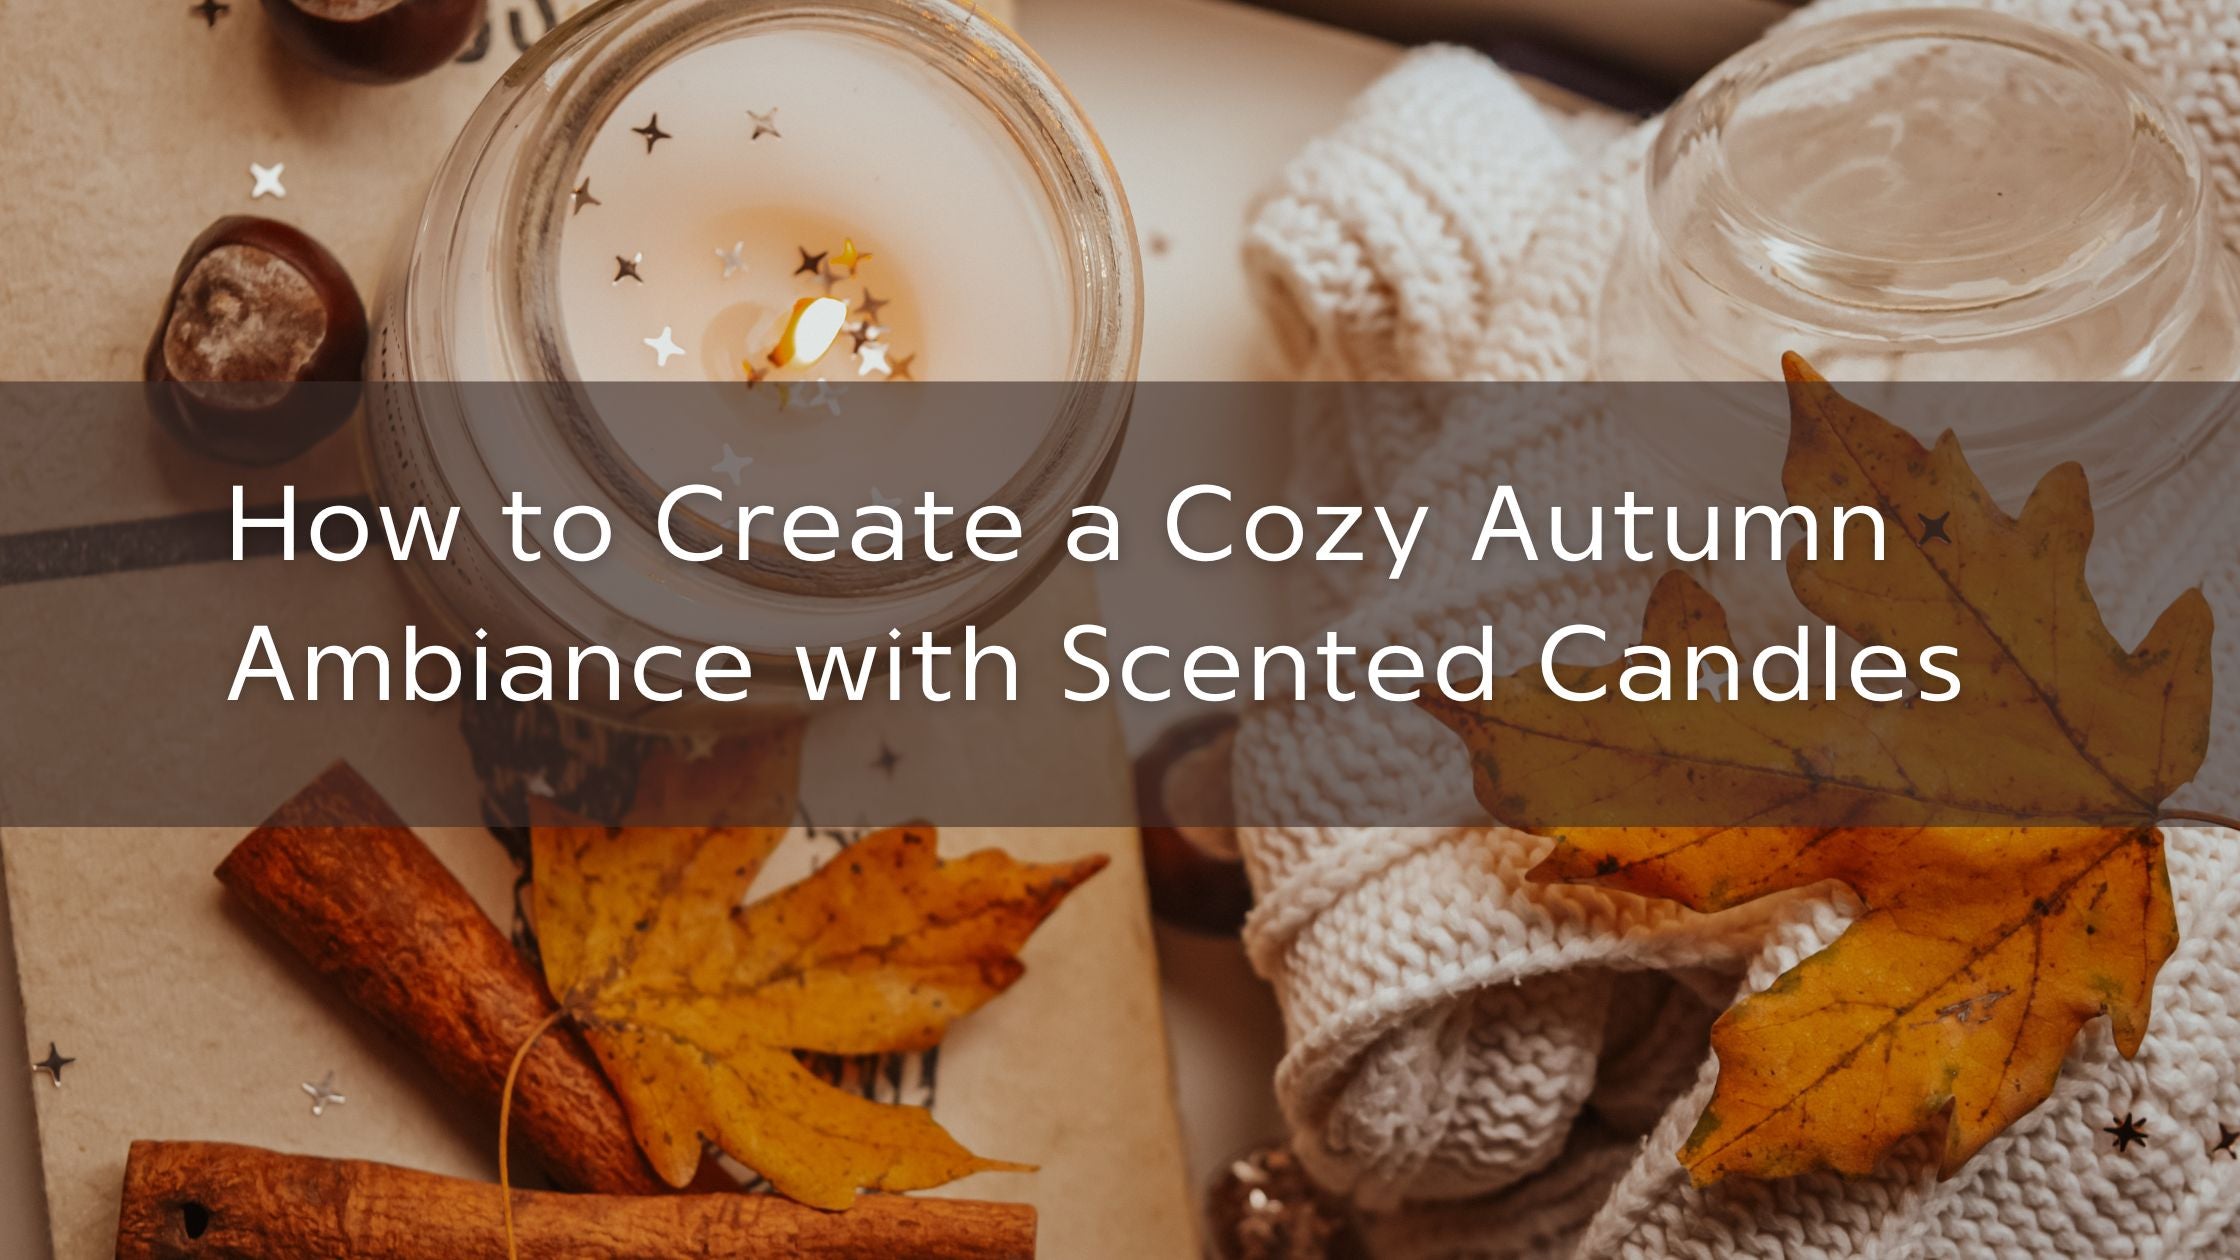 How to Make a Candle With Fall Scents